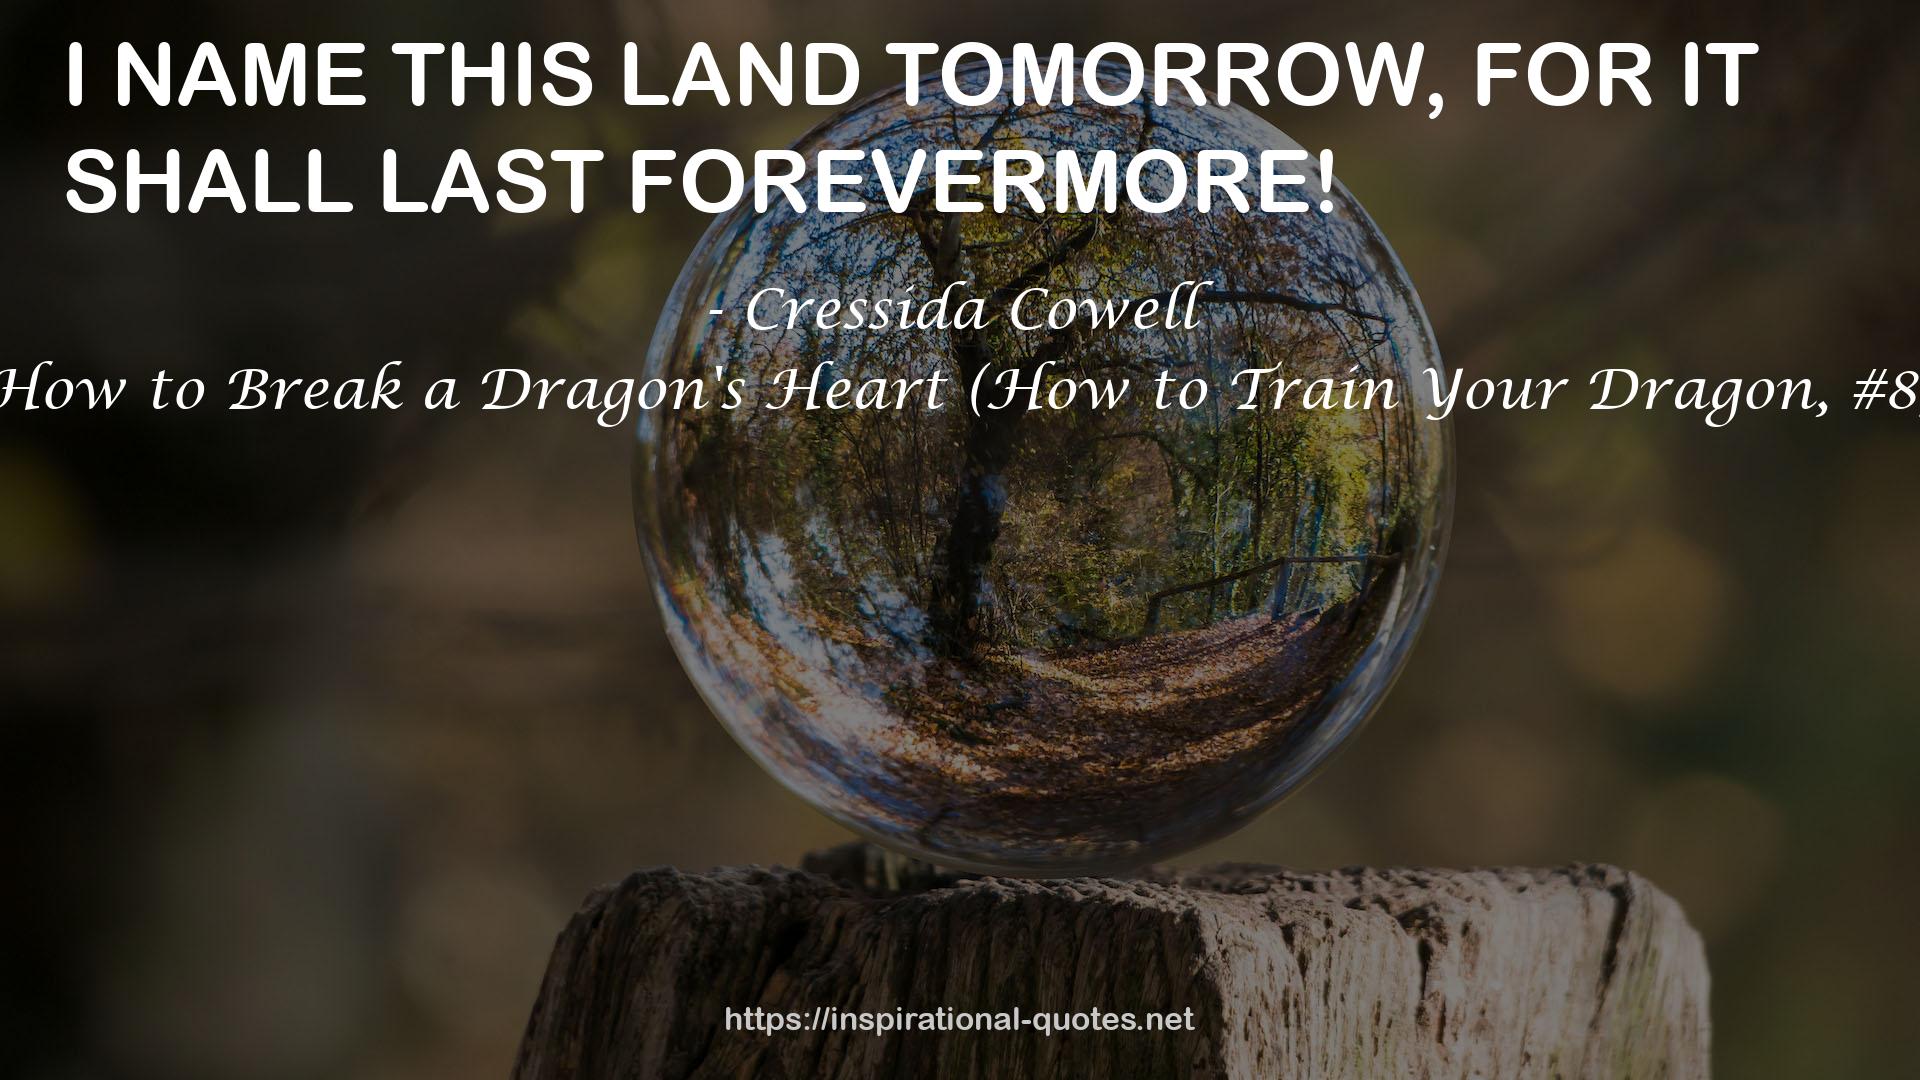 How to Break a Dragon's Heart (How to Train Your Dragon, #8) QUOTES